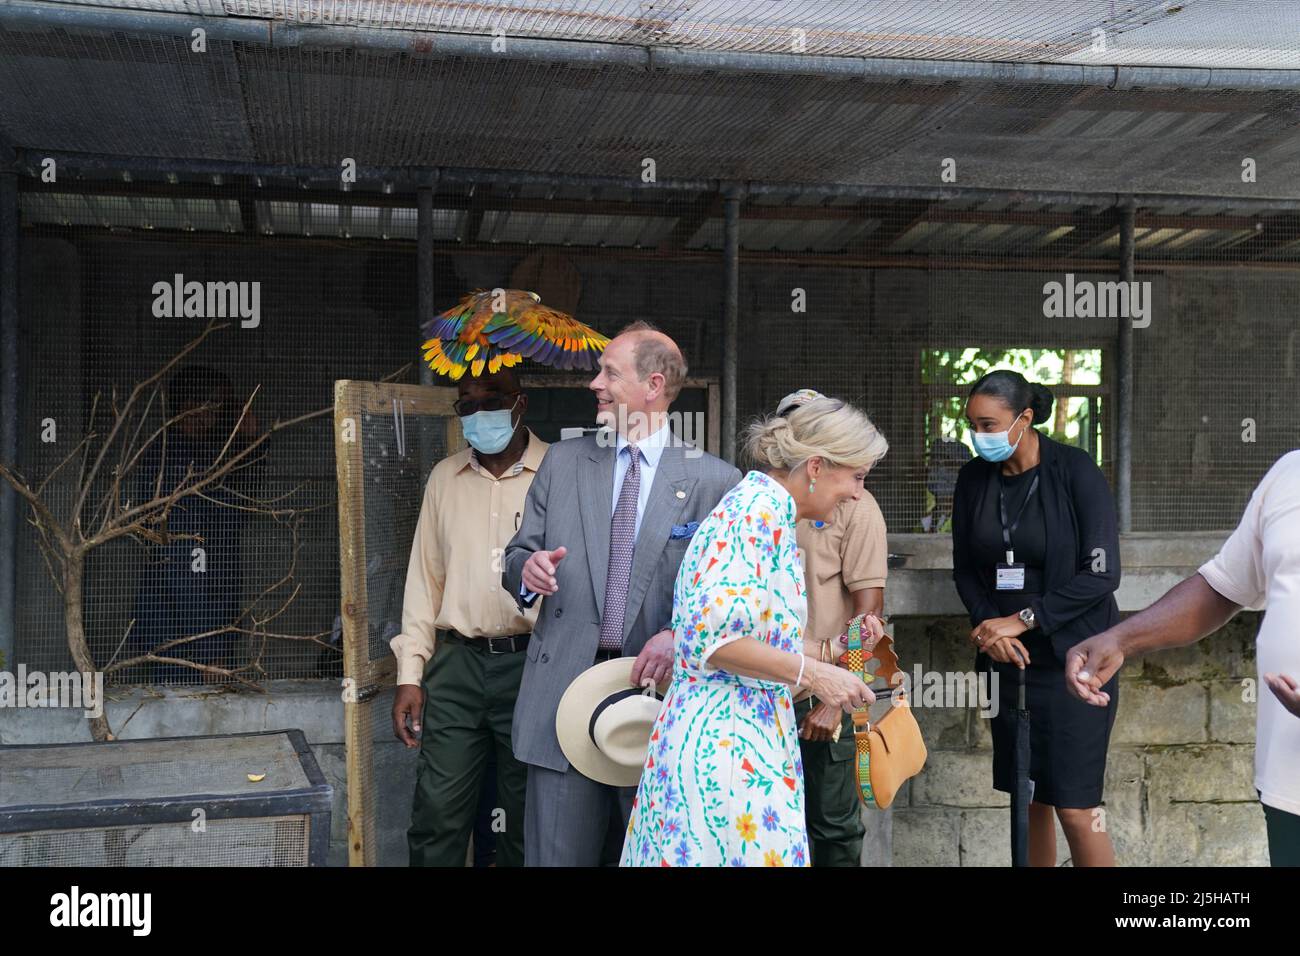 The Earl and the Countess of Wessex with St Vincent's national bird, the Amazona guildingii after it nearly knocked her sunglasses at the Botanical Gardens in St Vincent and the Grenadines, as they continue their visit to the Caribbean, to mark the Queen's Platinum Jubilee. Picture date: Saturday April 23, 2022. Stock Photo